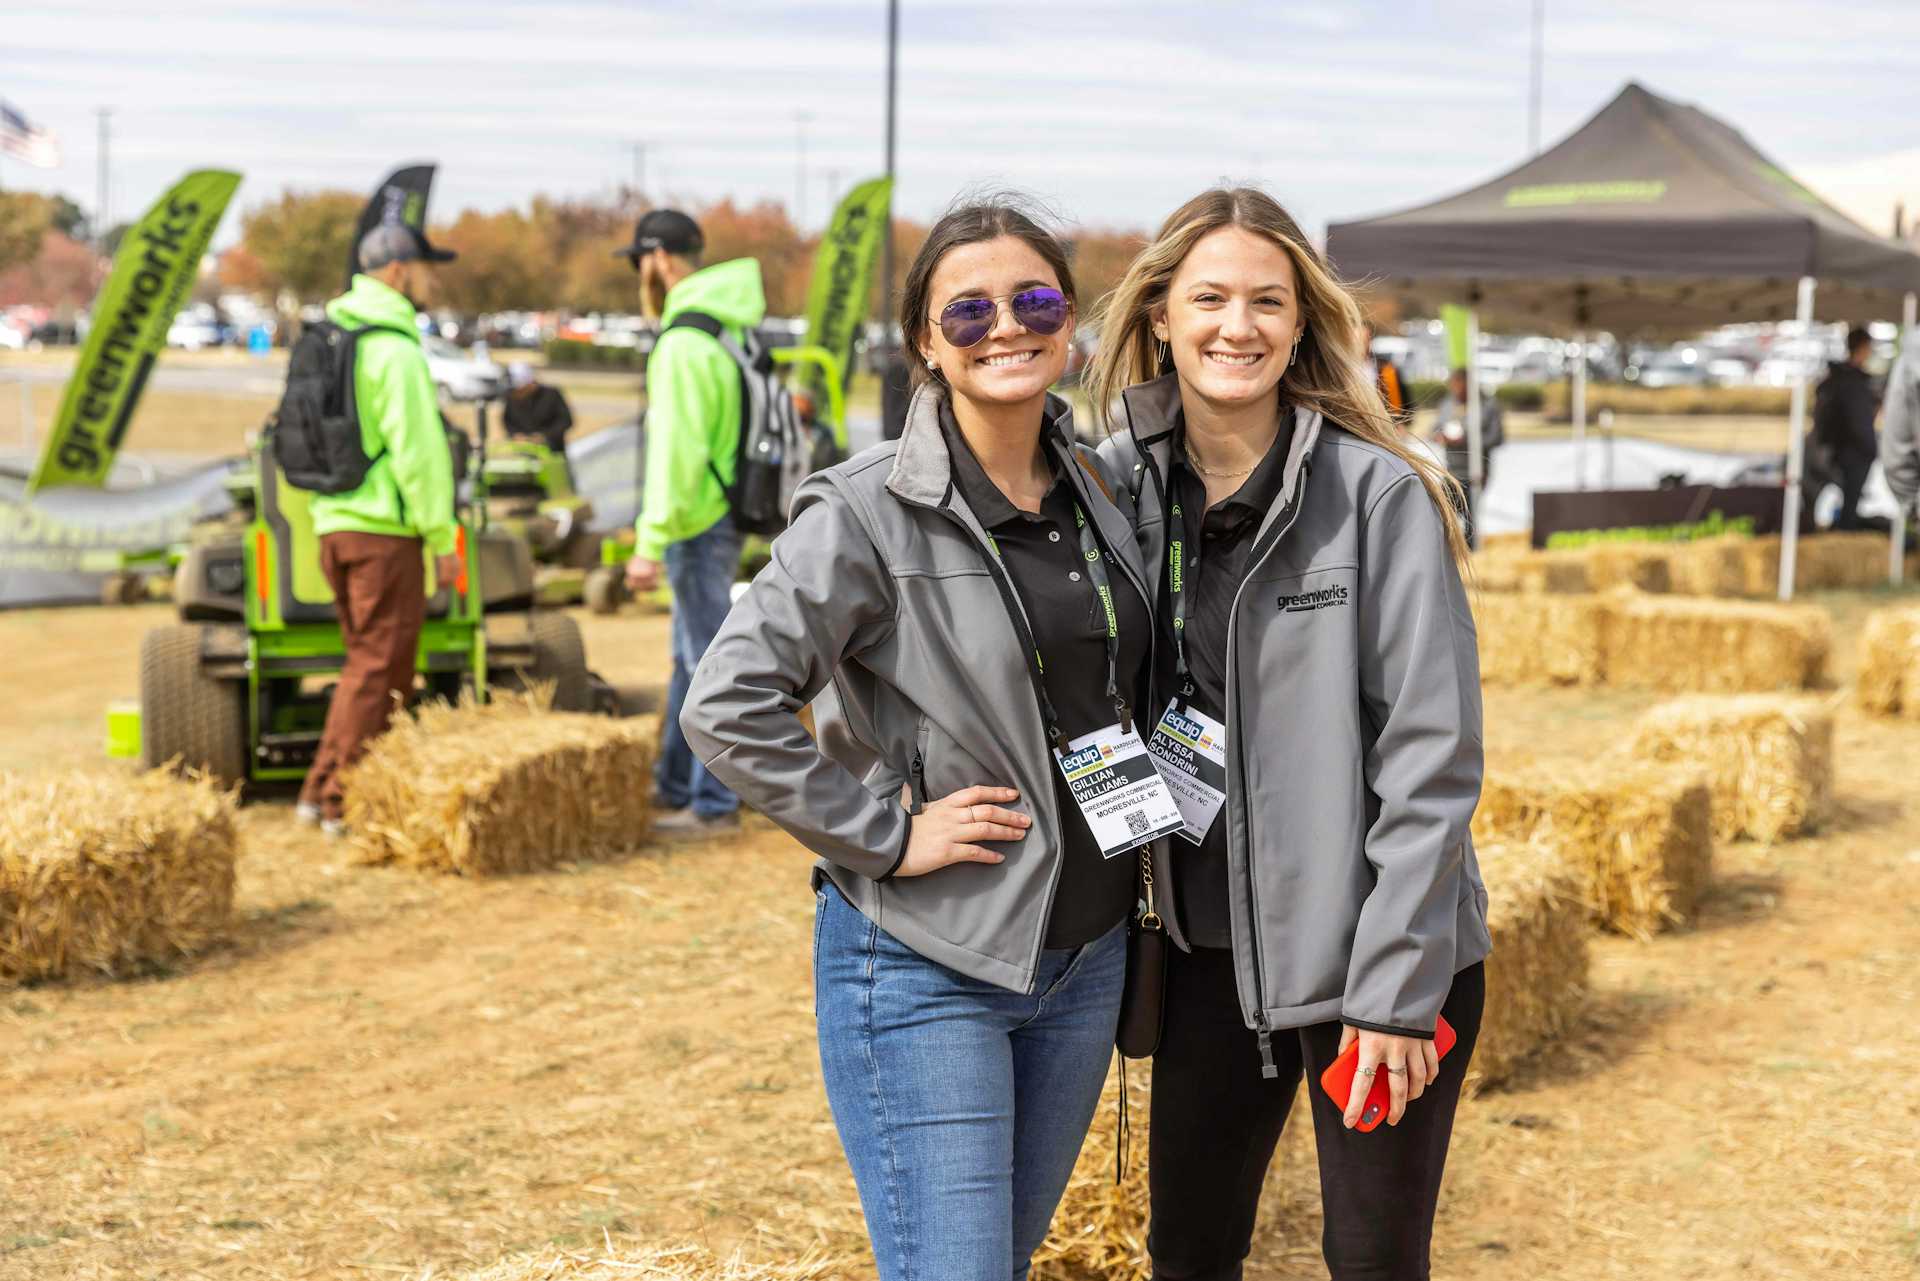 Equip Expo Offers Opportunities for Women in the Green Industry to Connect & Grow-321fd4b9-377d-4d27-9505-7bb5468c5ace